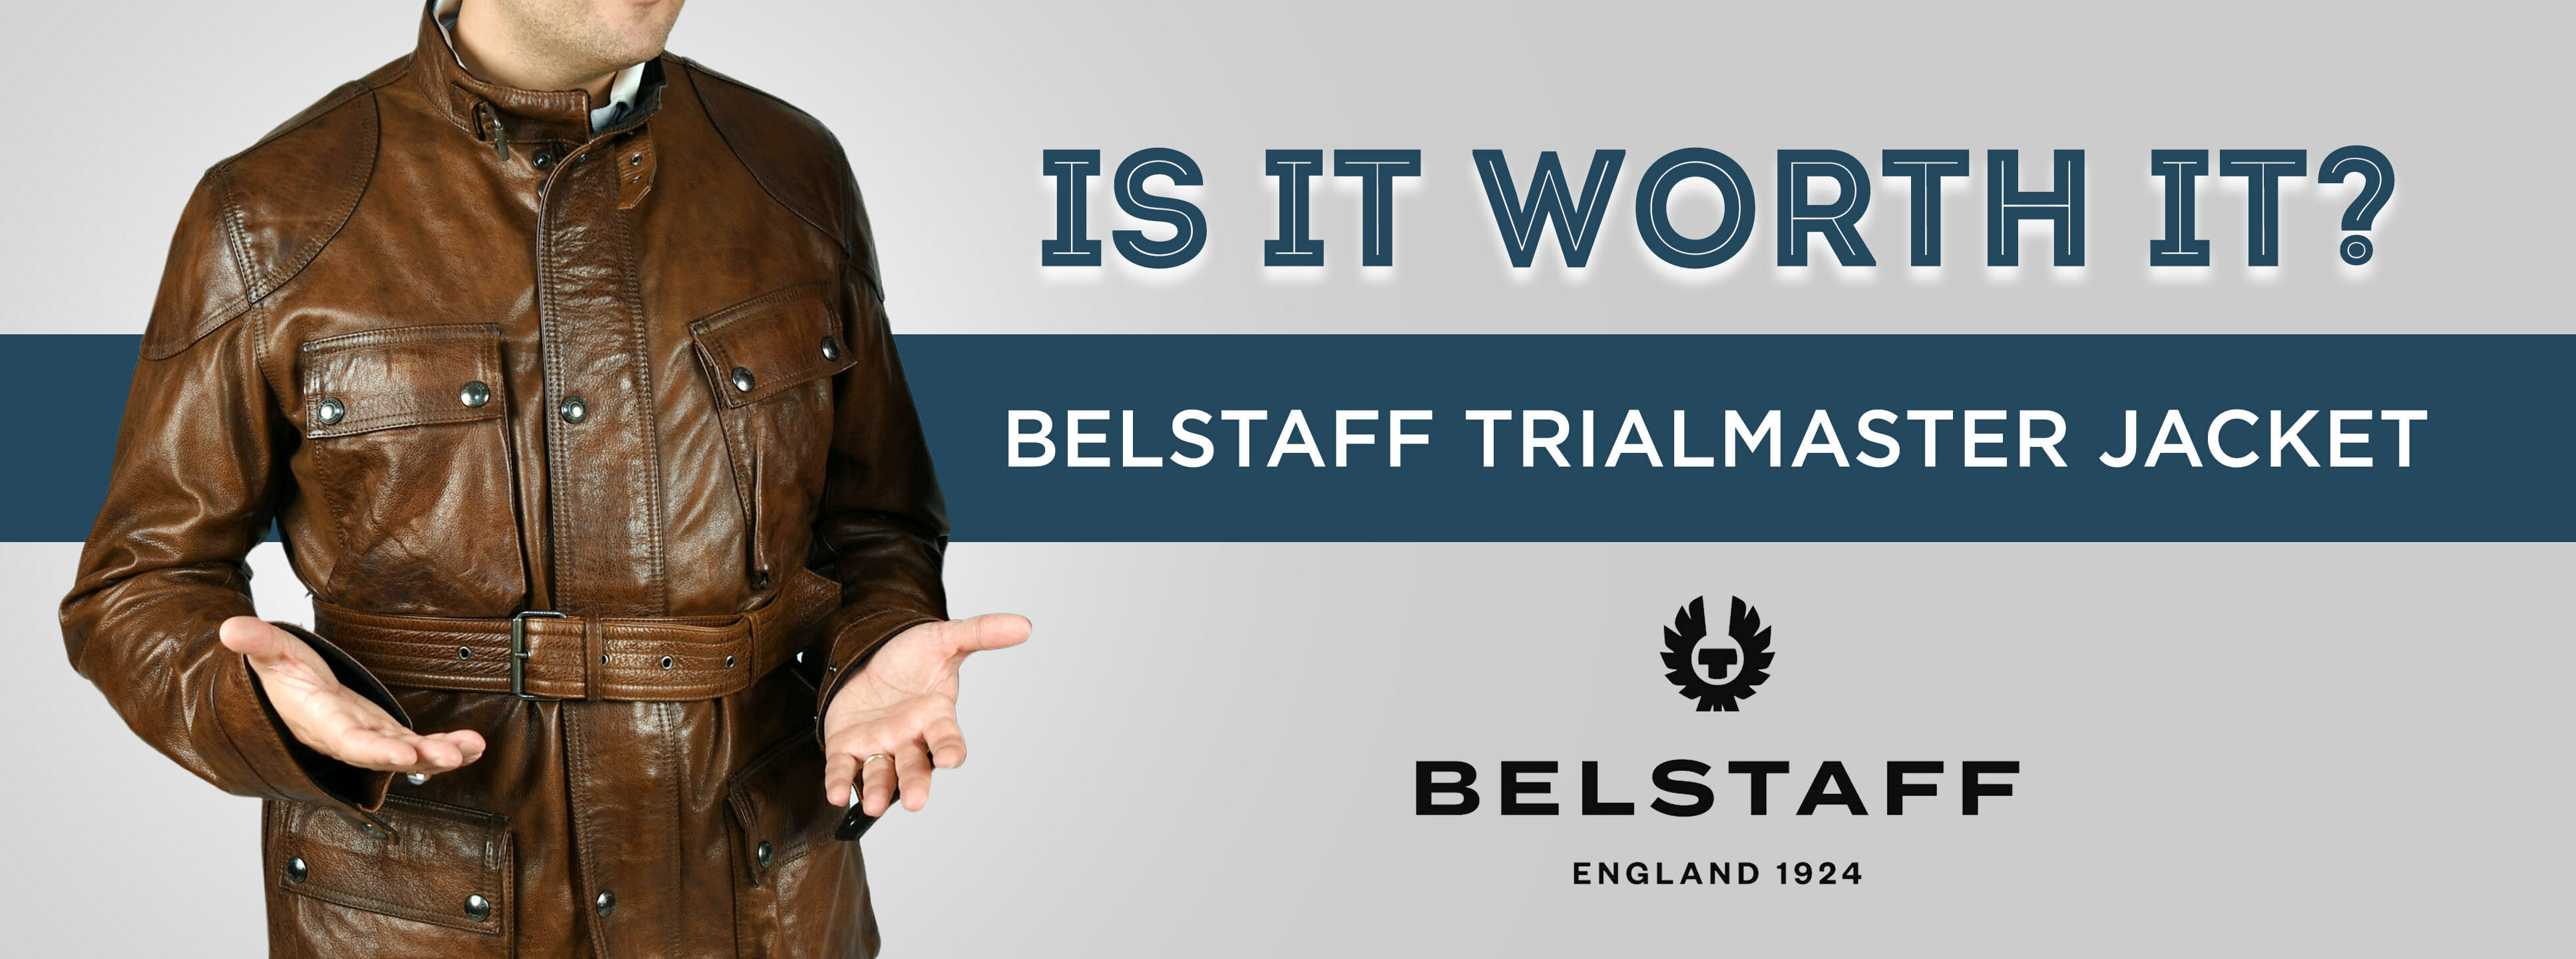 Belstaff Trialmaster Jacket Is It, Usa Leather Jacket Reviews